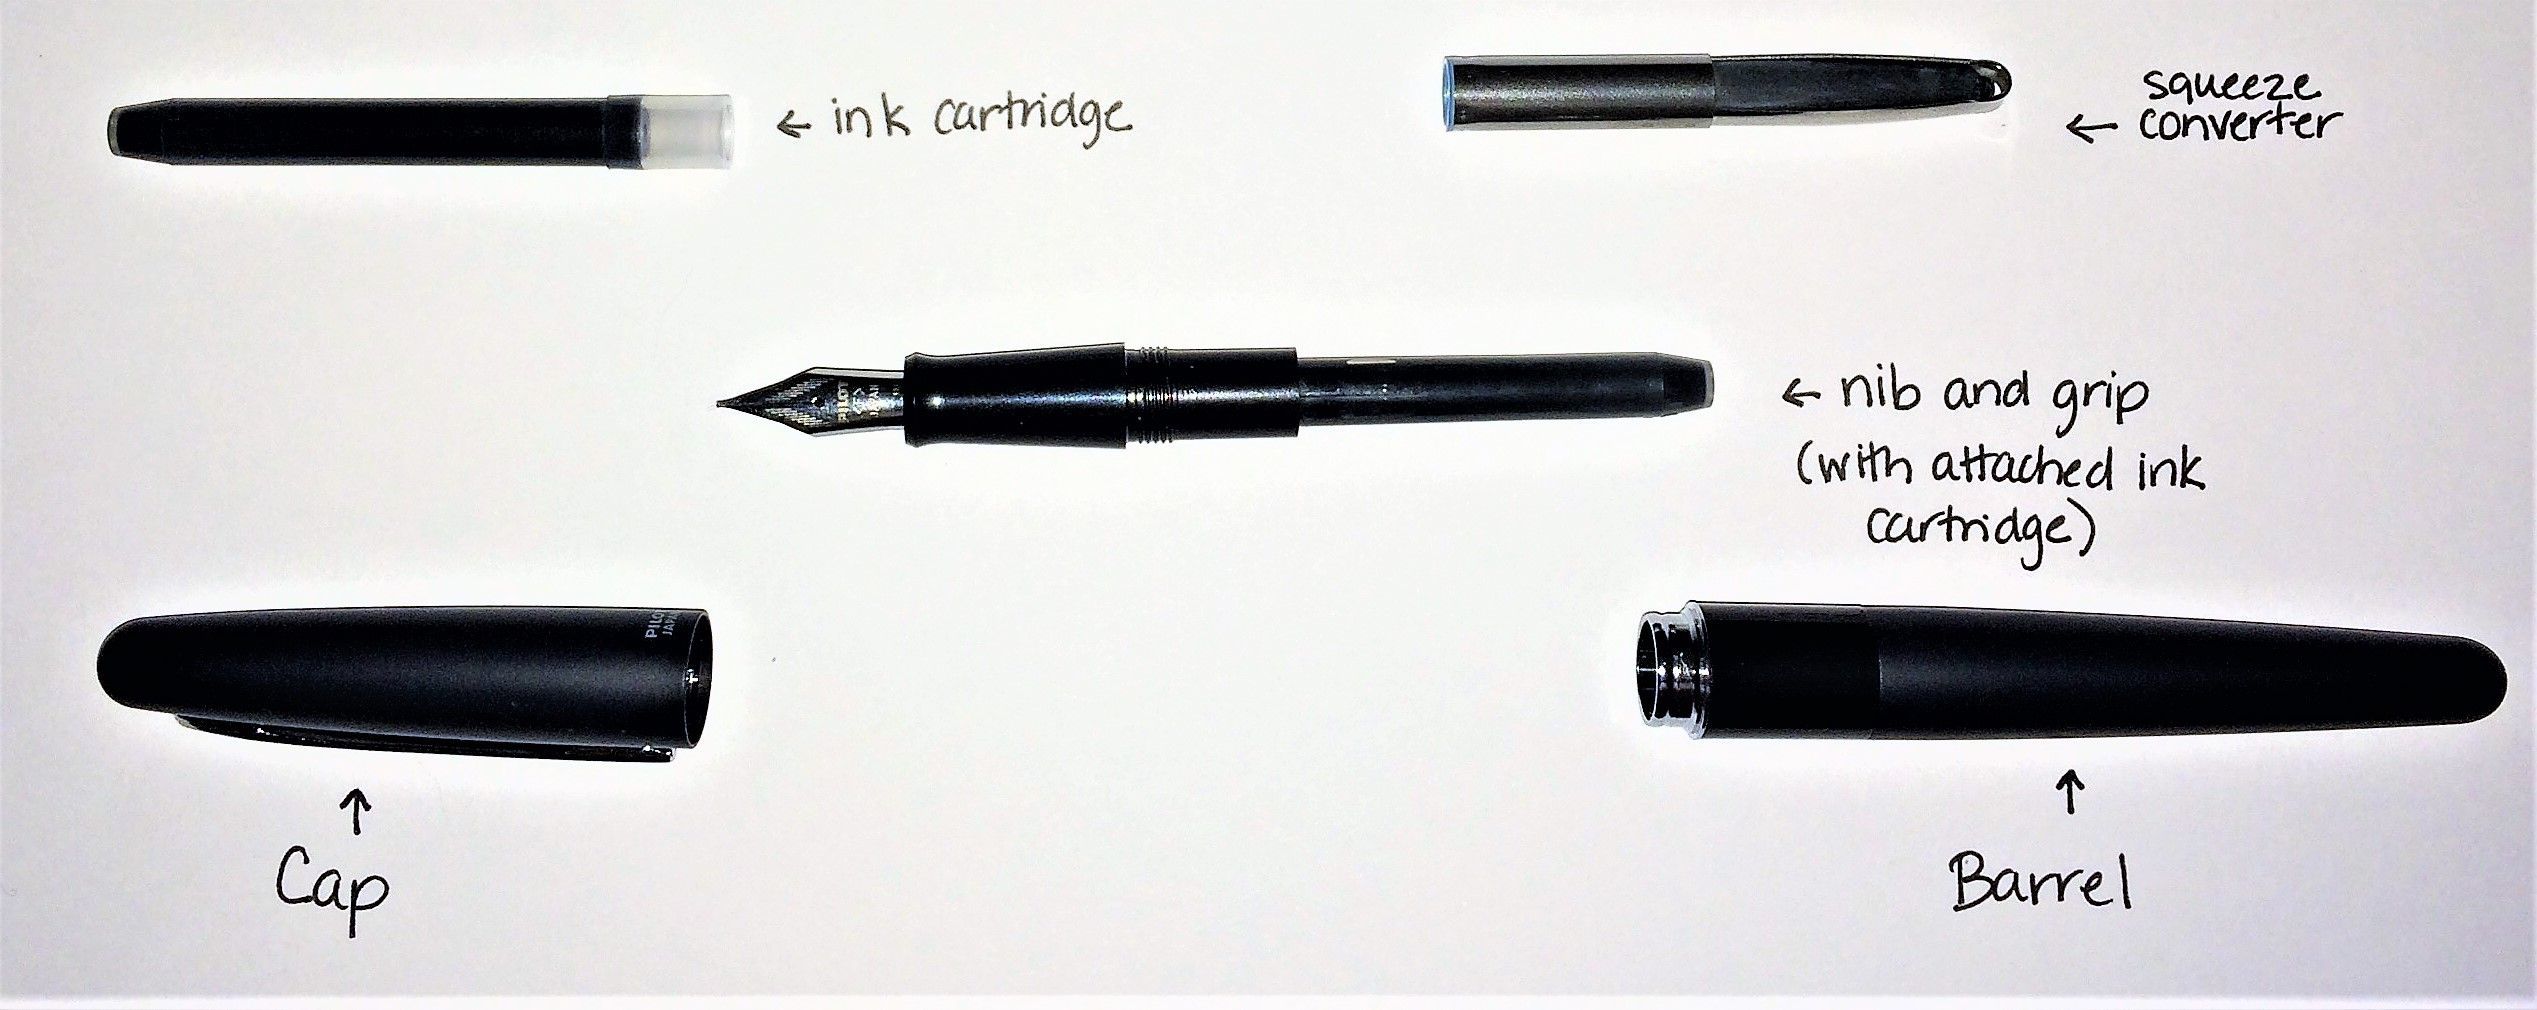 How to Put Ink in Fountain Pen Disassembled Pilot Metropolitan